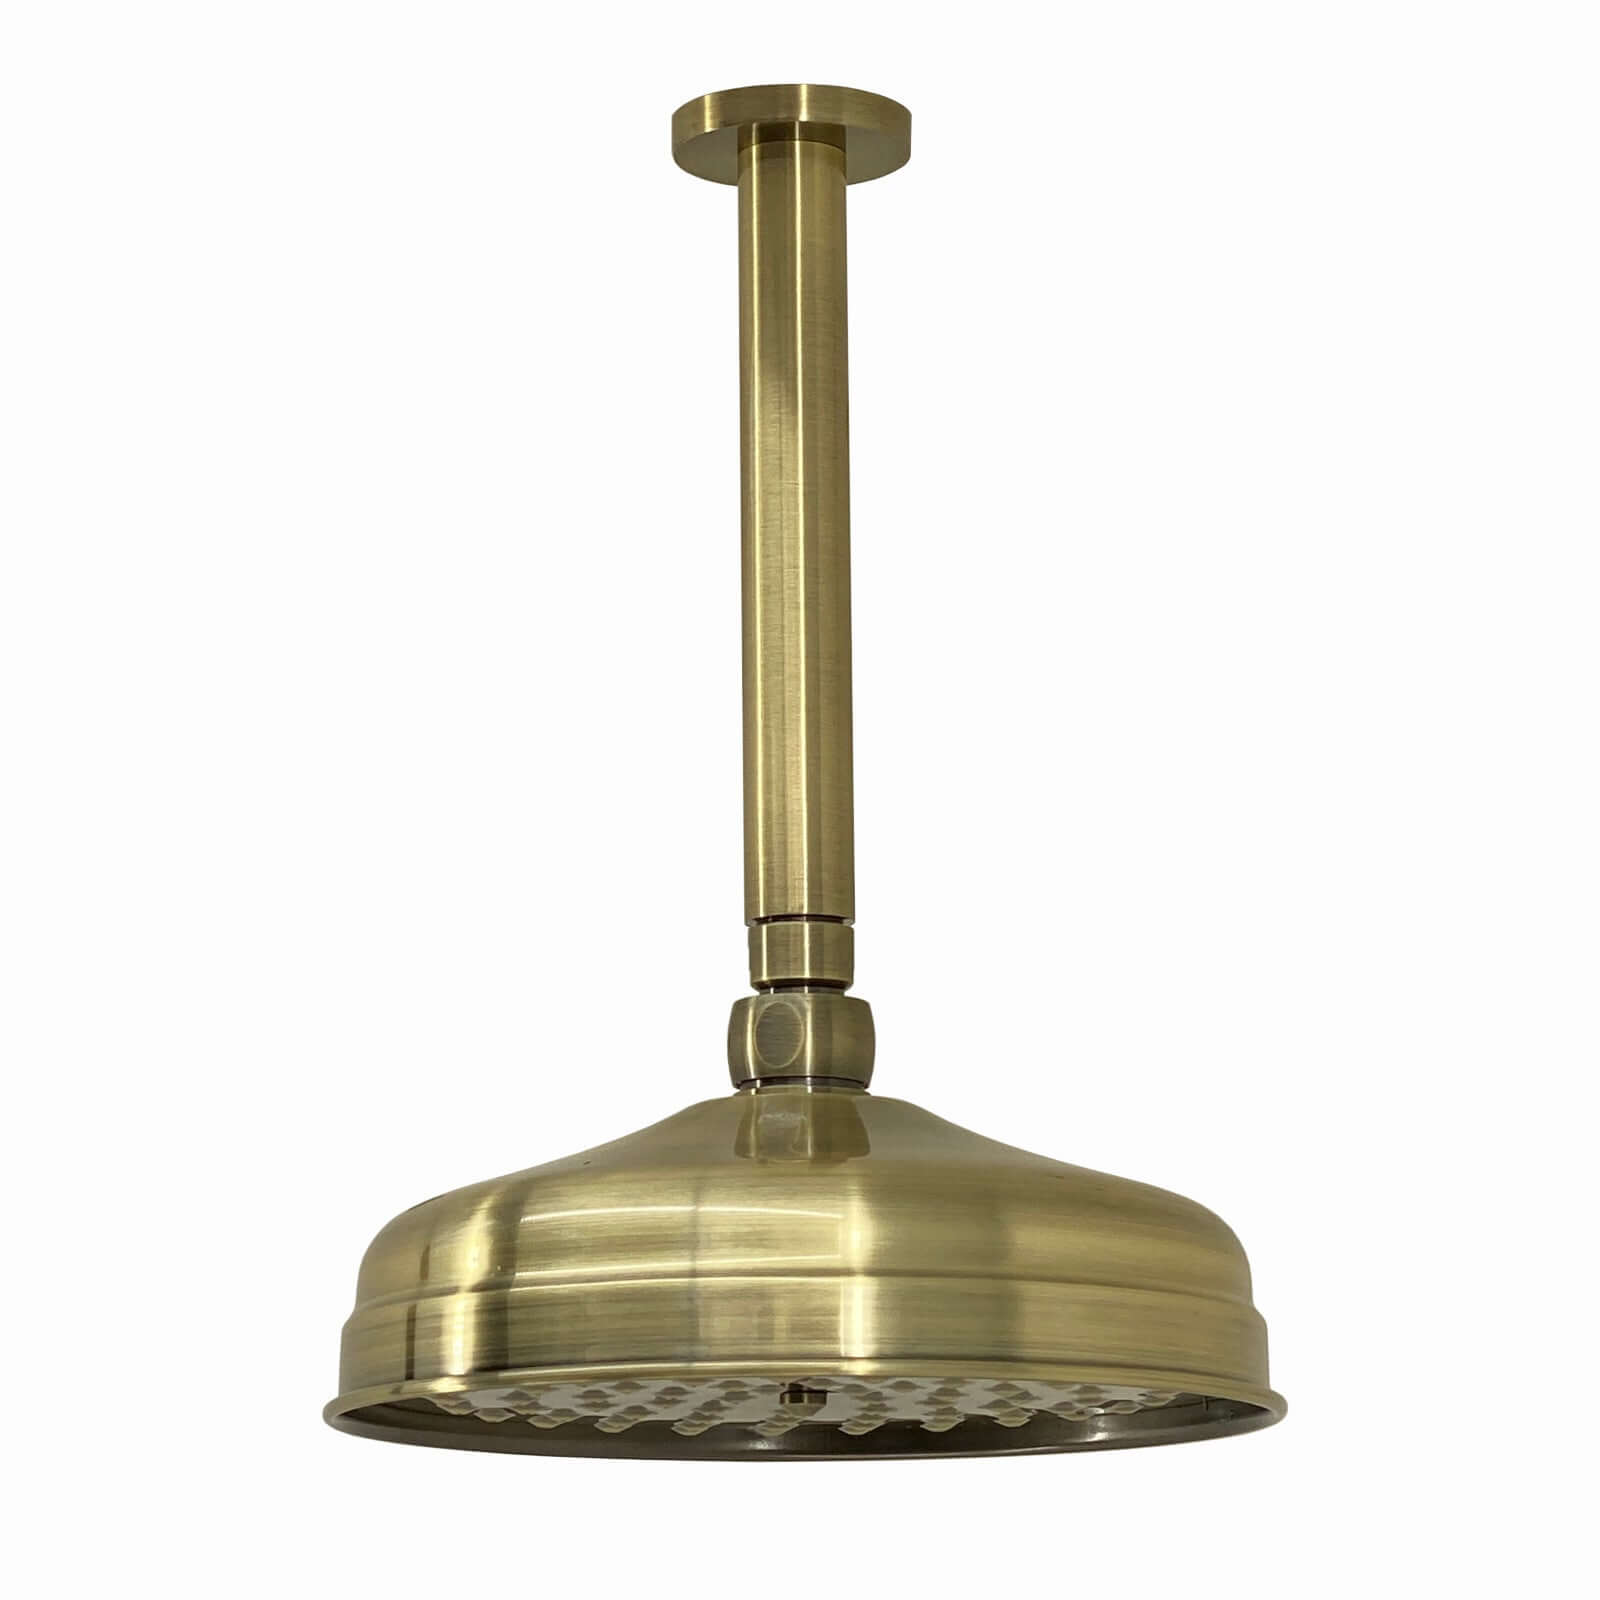 SH0255-03-RA049-01-traditional-ceiling-fixed-apron-brass-shower-head-8-with-180mm-ceiling-shower-arm-antique-bronze